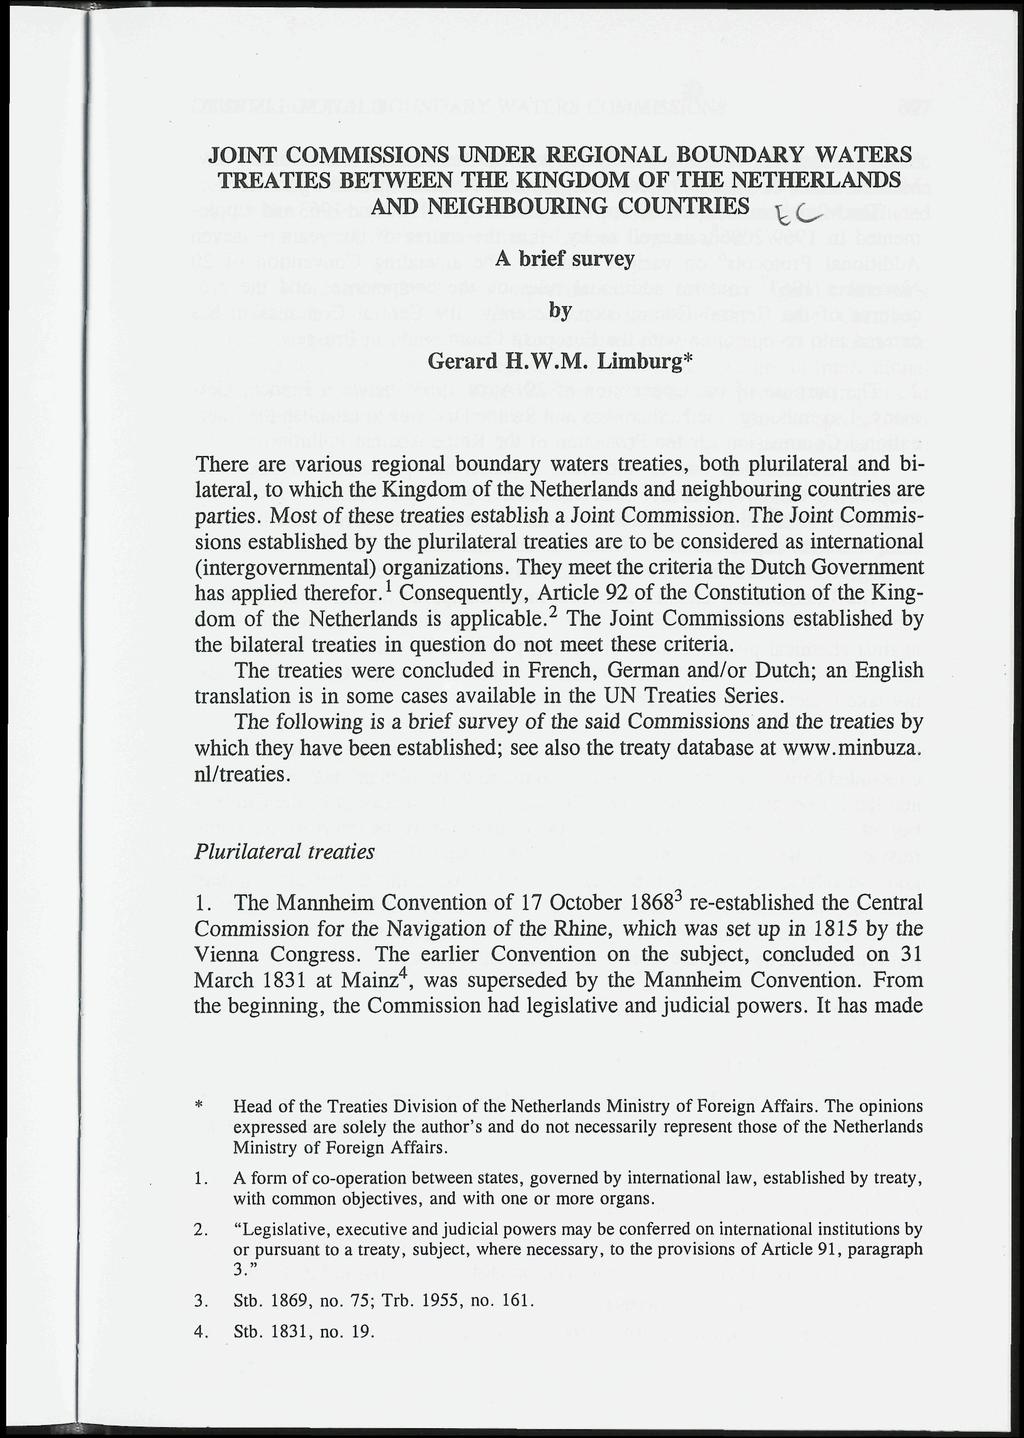 JOINT COMMISSIONS UNDER REGIONAL BOUNDARY WATERS TREATIES BETWEEN THE KINGDOM OF THE NETHERLANDS AND NEIGHBOURING COUNTRIES ^(^ A brief survey by Gerard H.W.M. Limburg* There are various regional boundary waters treaties, both plurilateral and bilateral, to which the Kingdom of the Netherlands and neighbouring countries are parties.